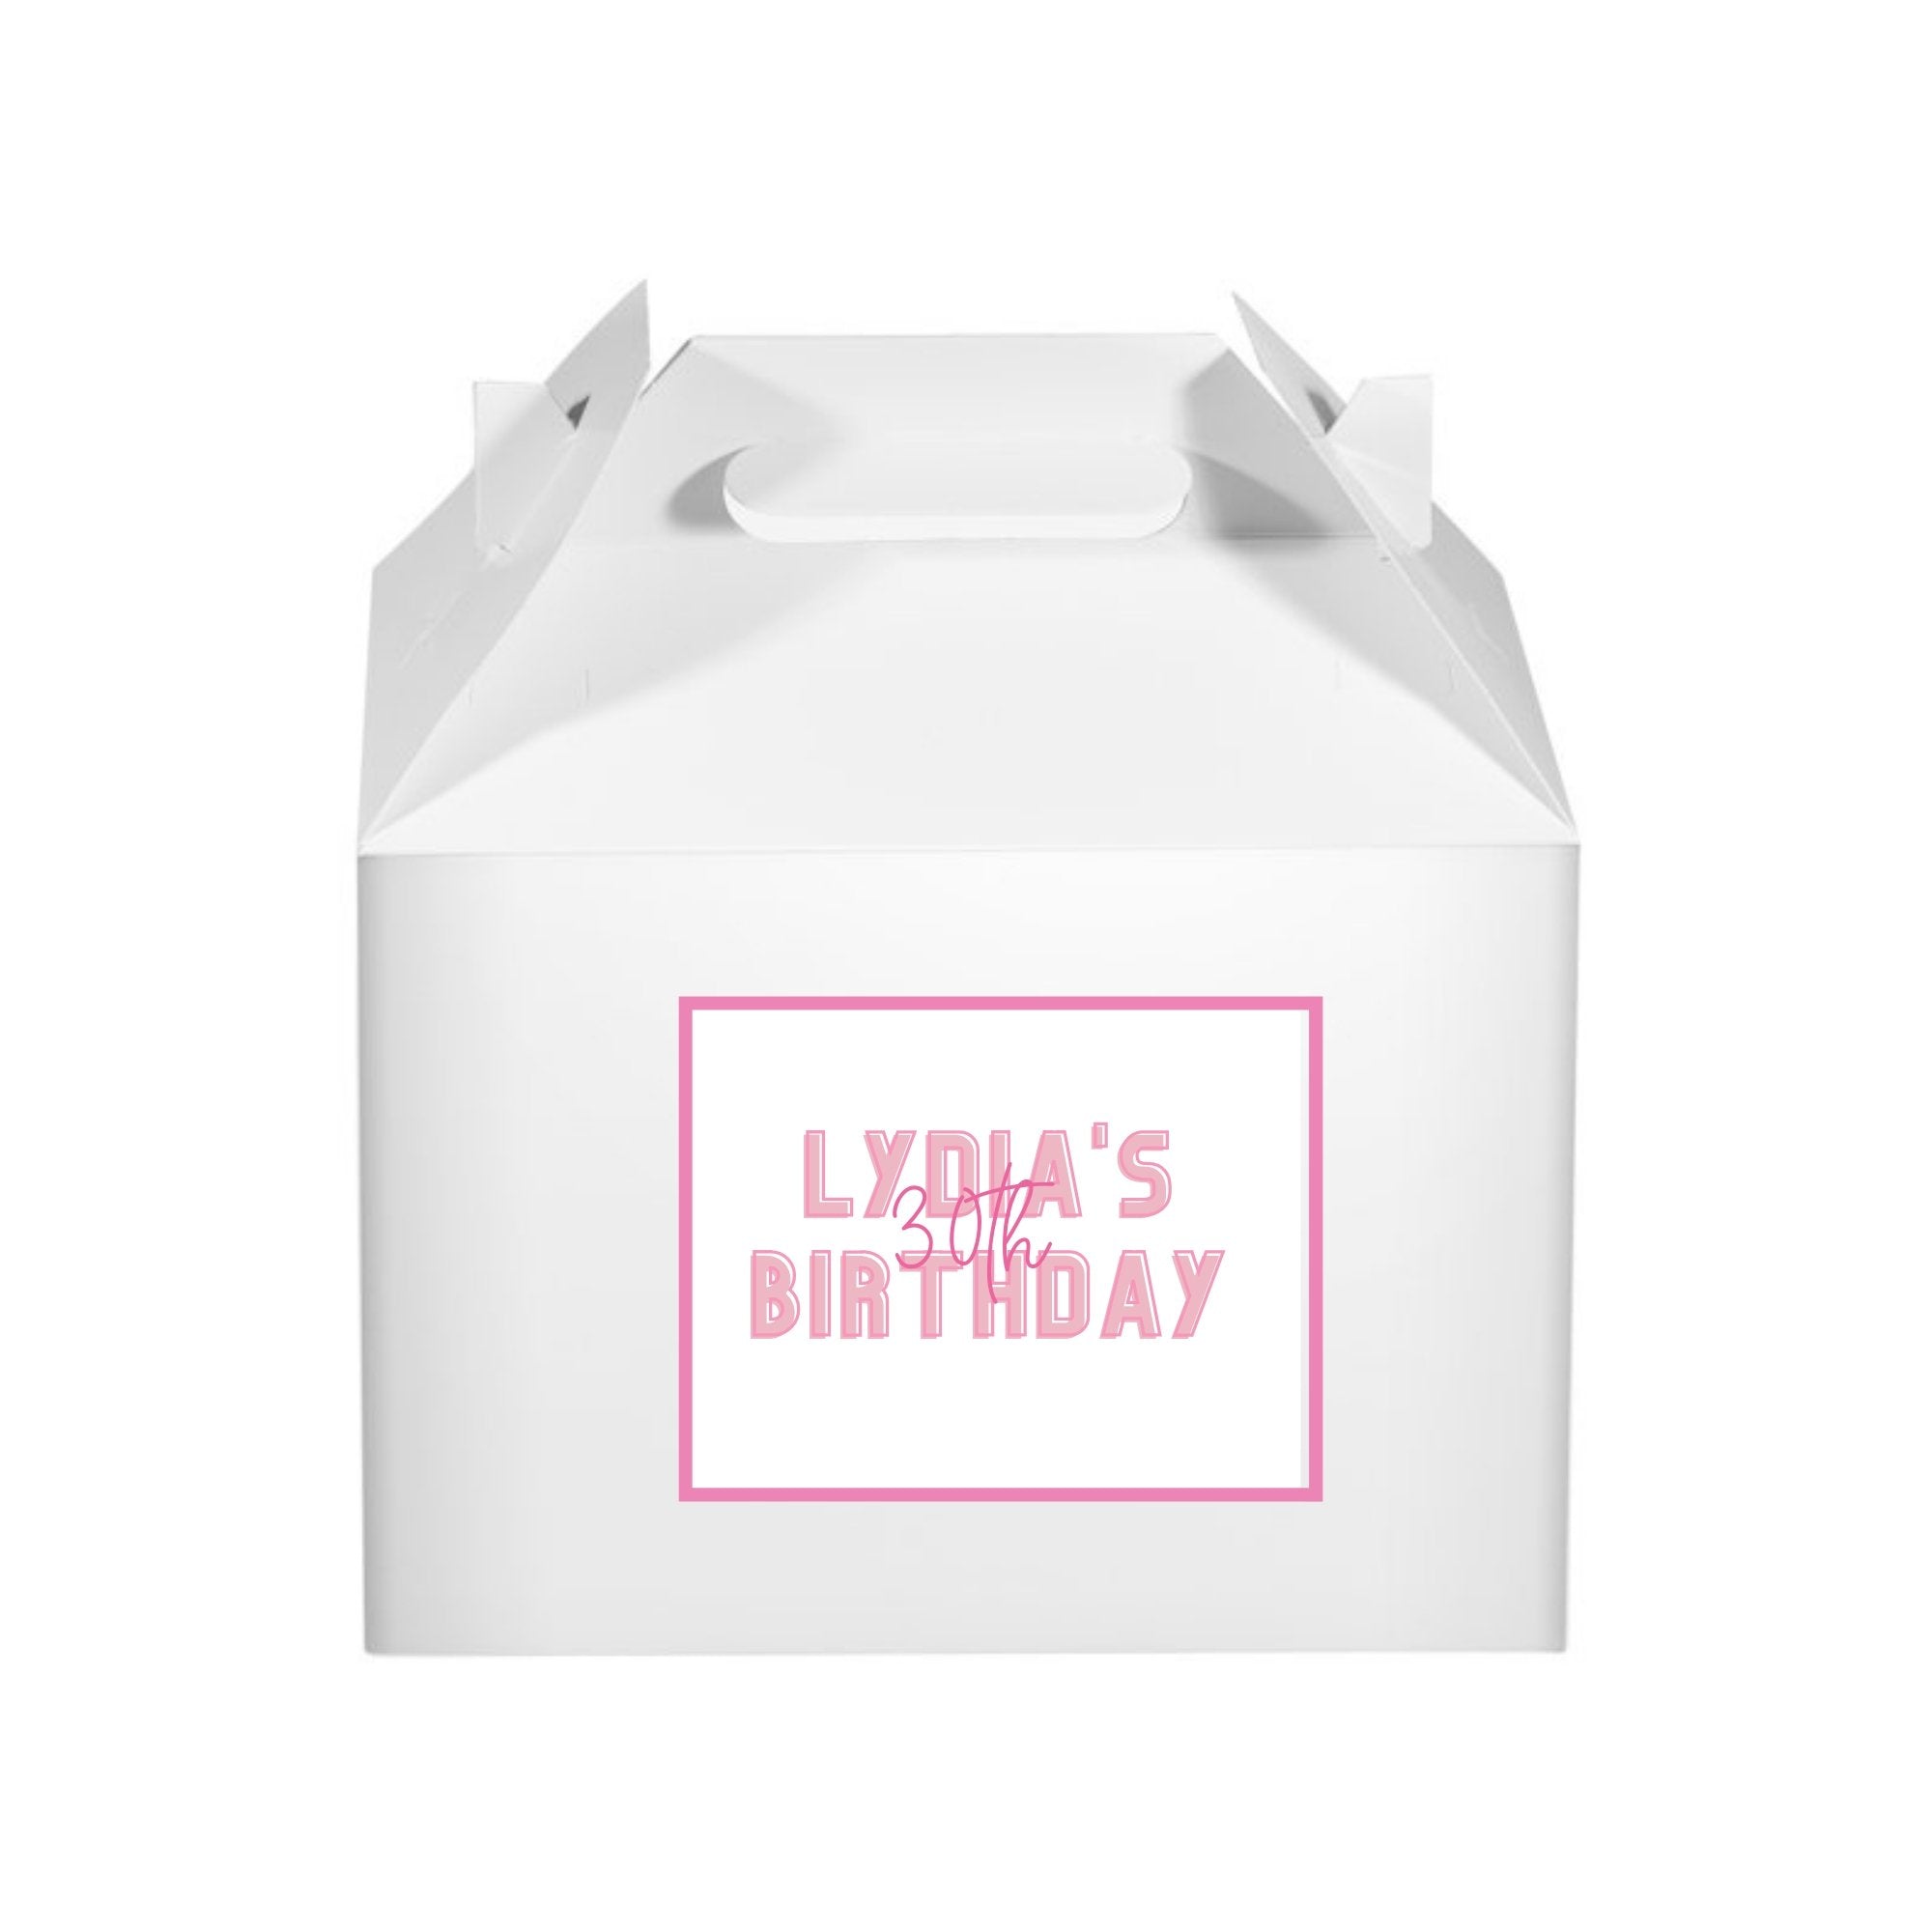 Custom Birthday treat/favor box with label (set of 12) - Sprinkled With Pink #bachelorette #custom #gifts